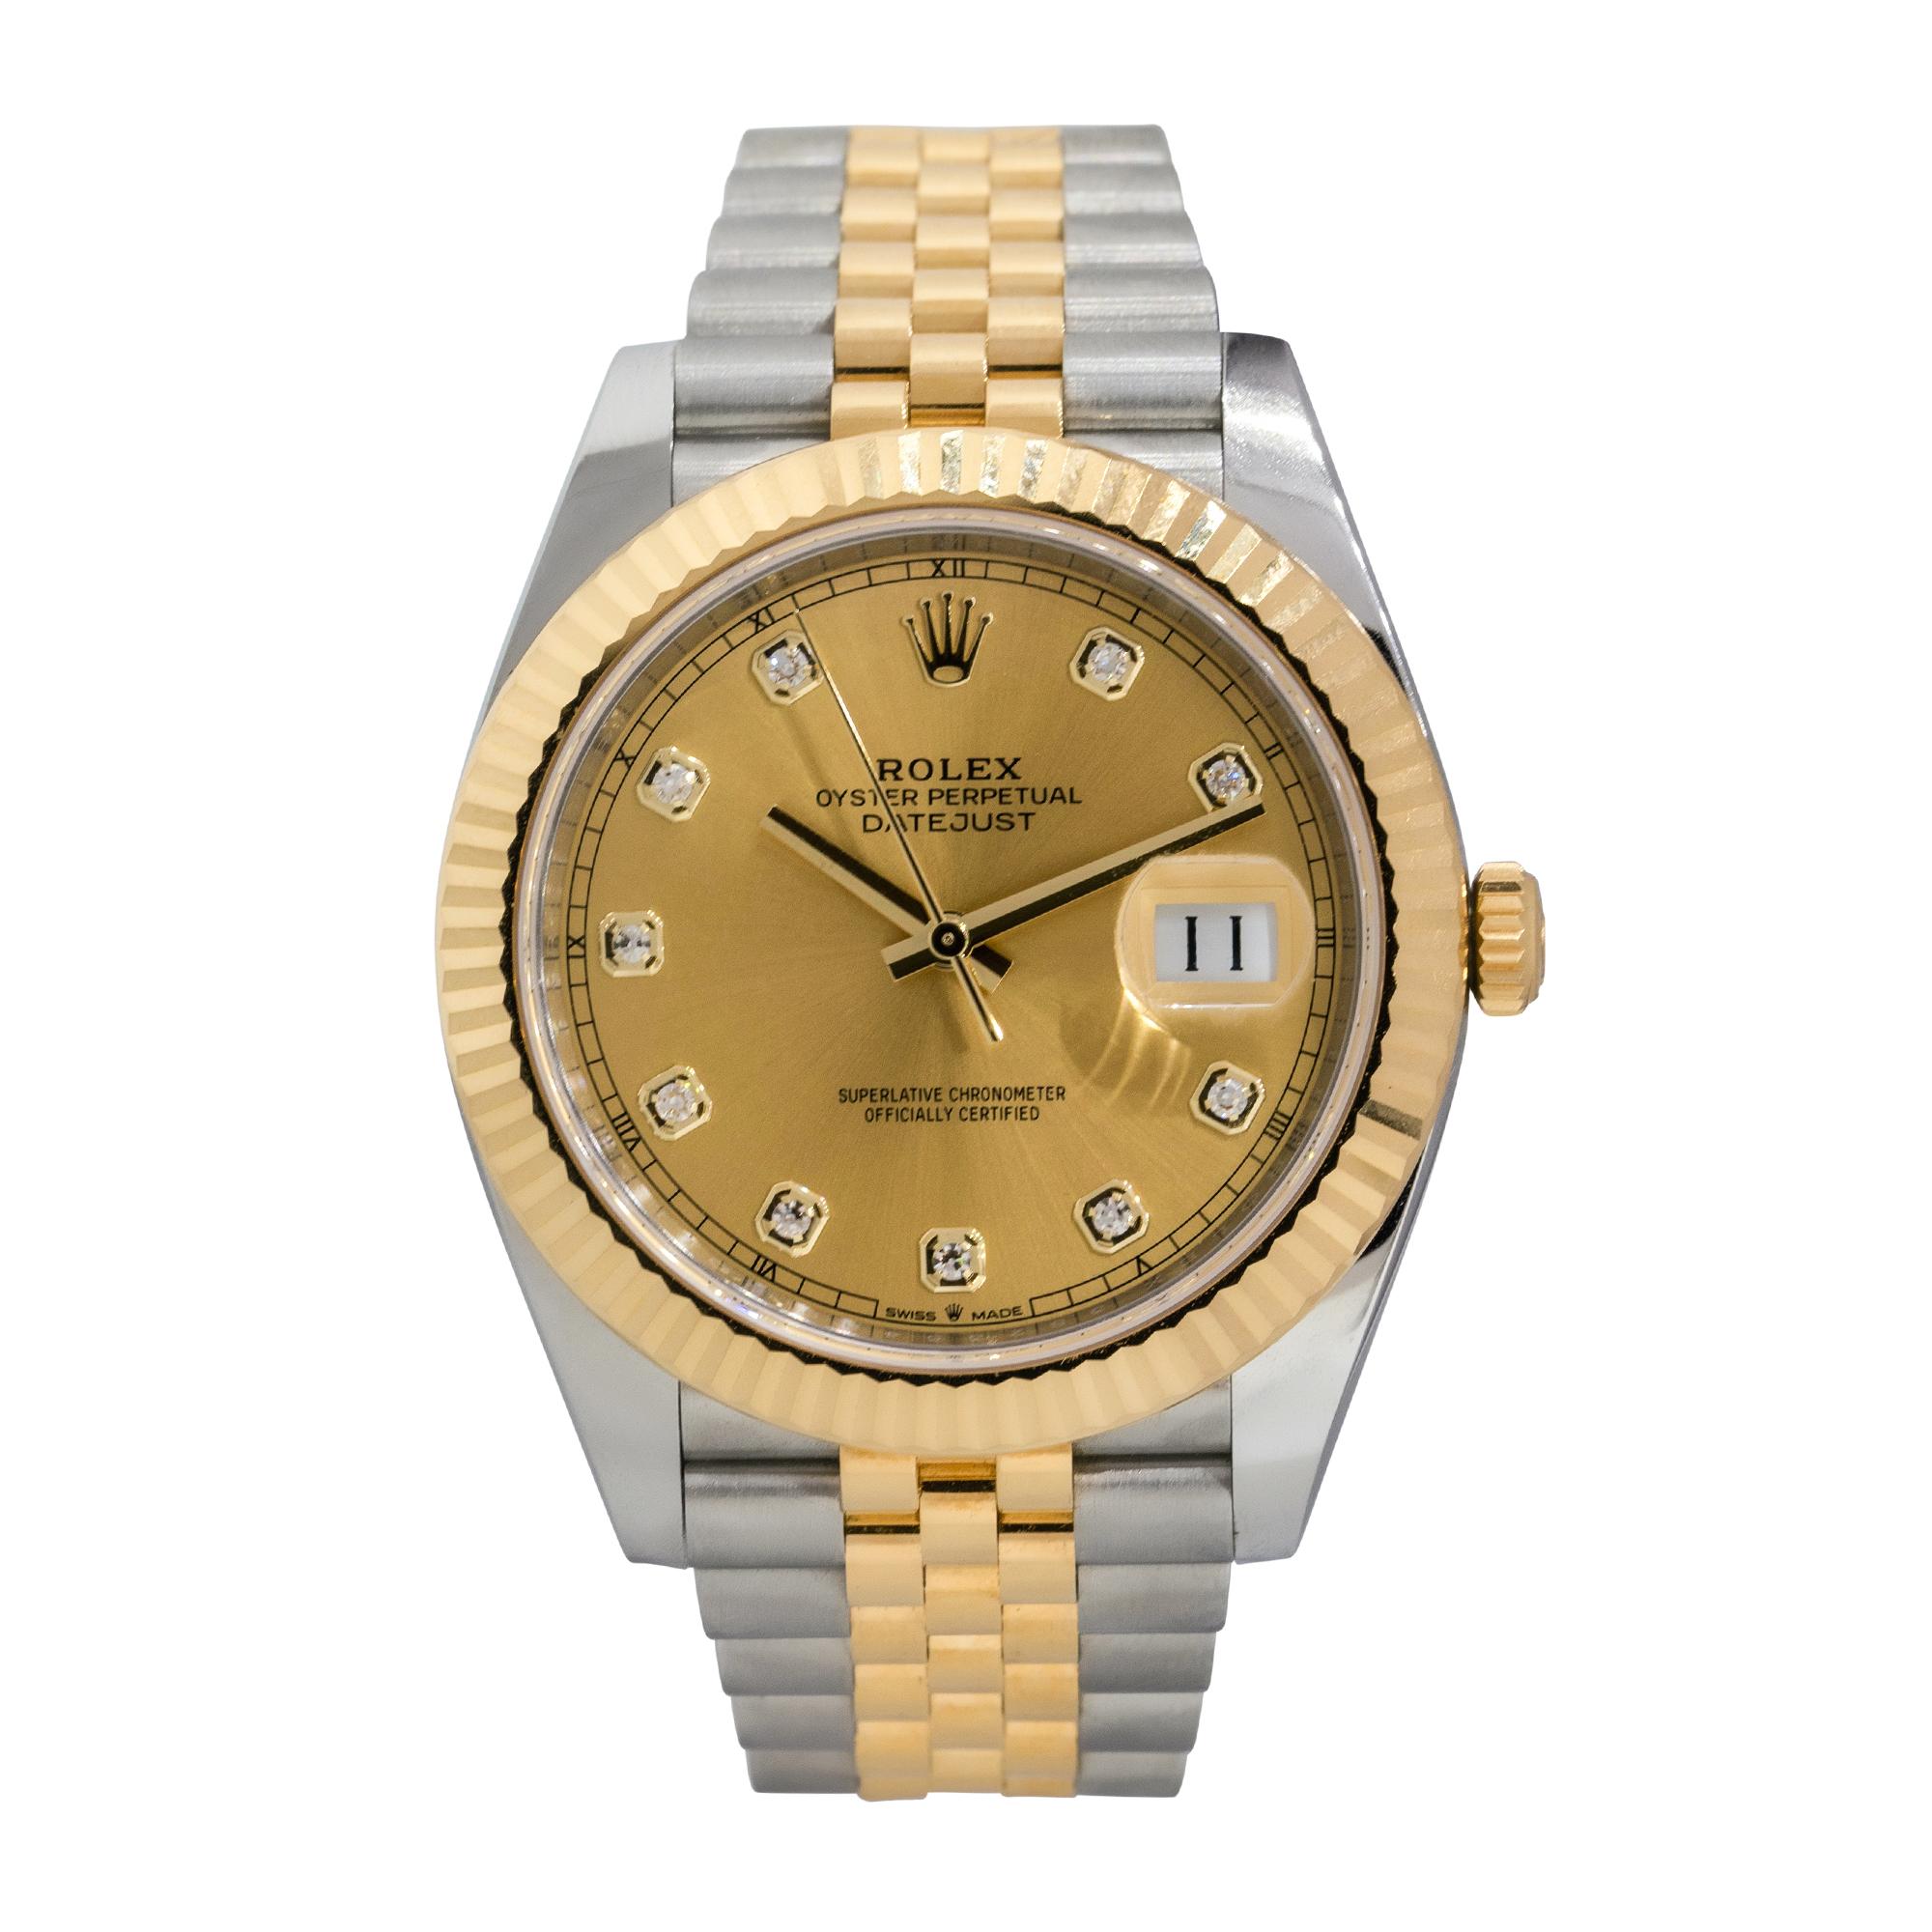 Brand: Rolex
MPN: 126333
Model: Datejust
Case Material: Stainless Steel
Case Diameter: 41mm
Crystal: Sapphire Crystal
Bezel: 18k Rose Gold Fluted Bezel
Dial: Factory champagne dial with Diamond numerals numerals. Date is displayed at 3 o'